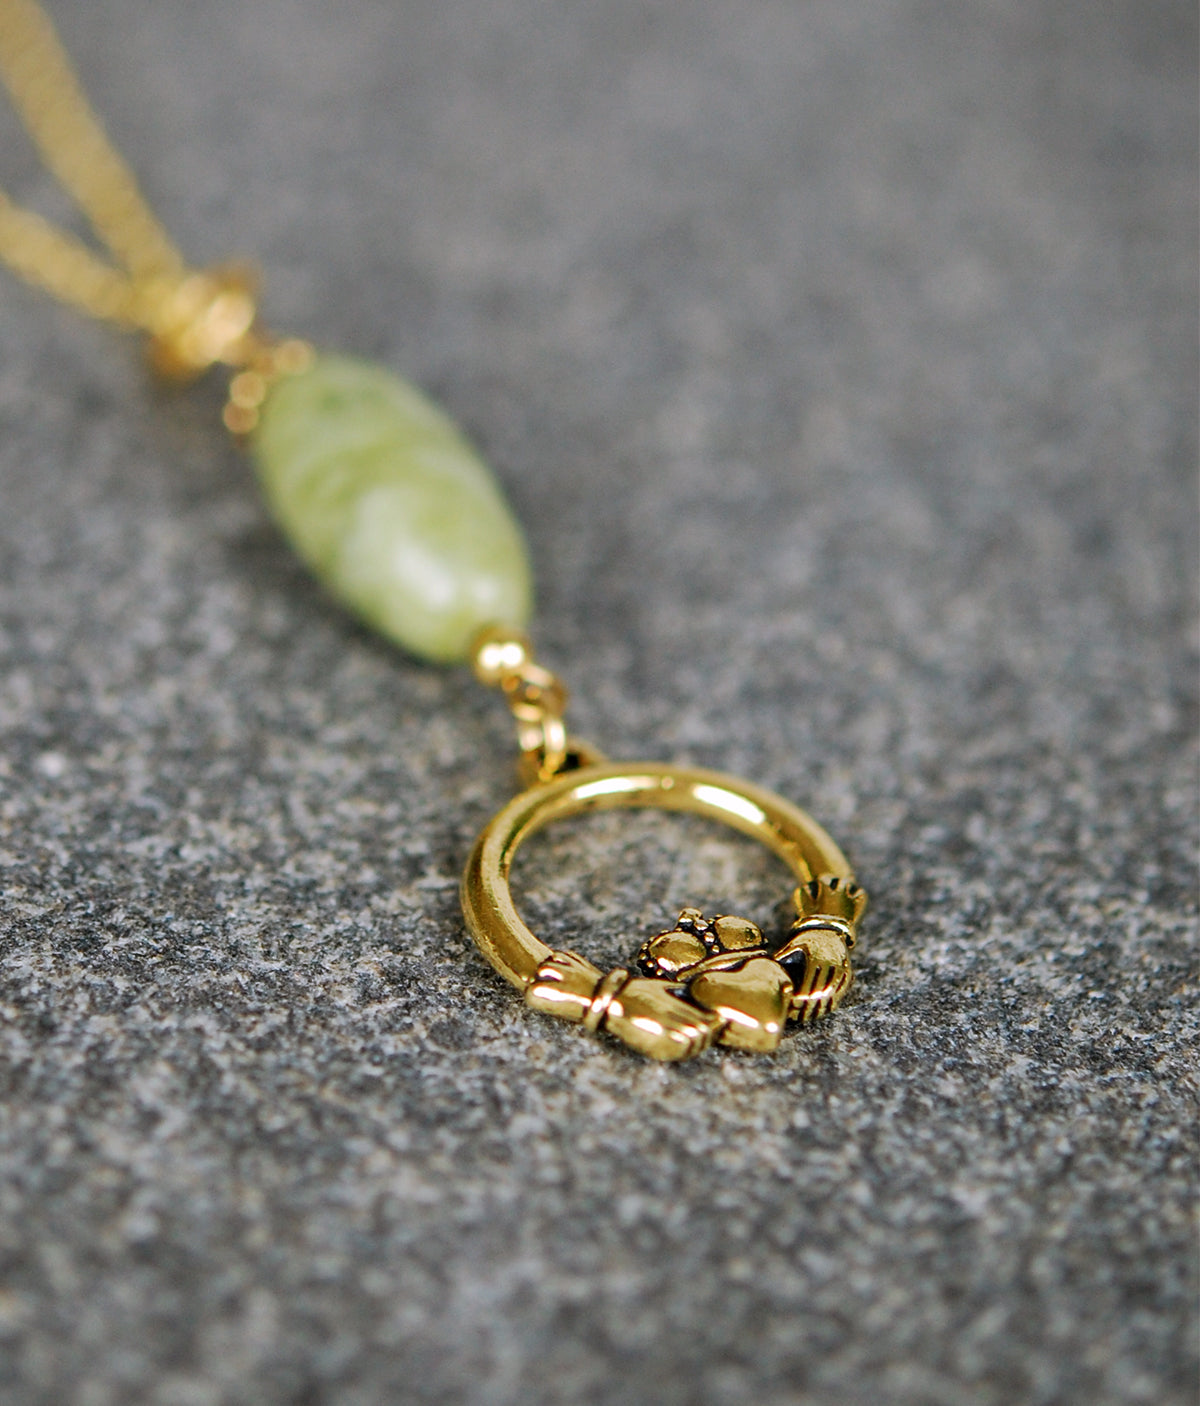 Connemara Marble with Gold Claddagh Pendant